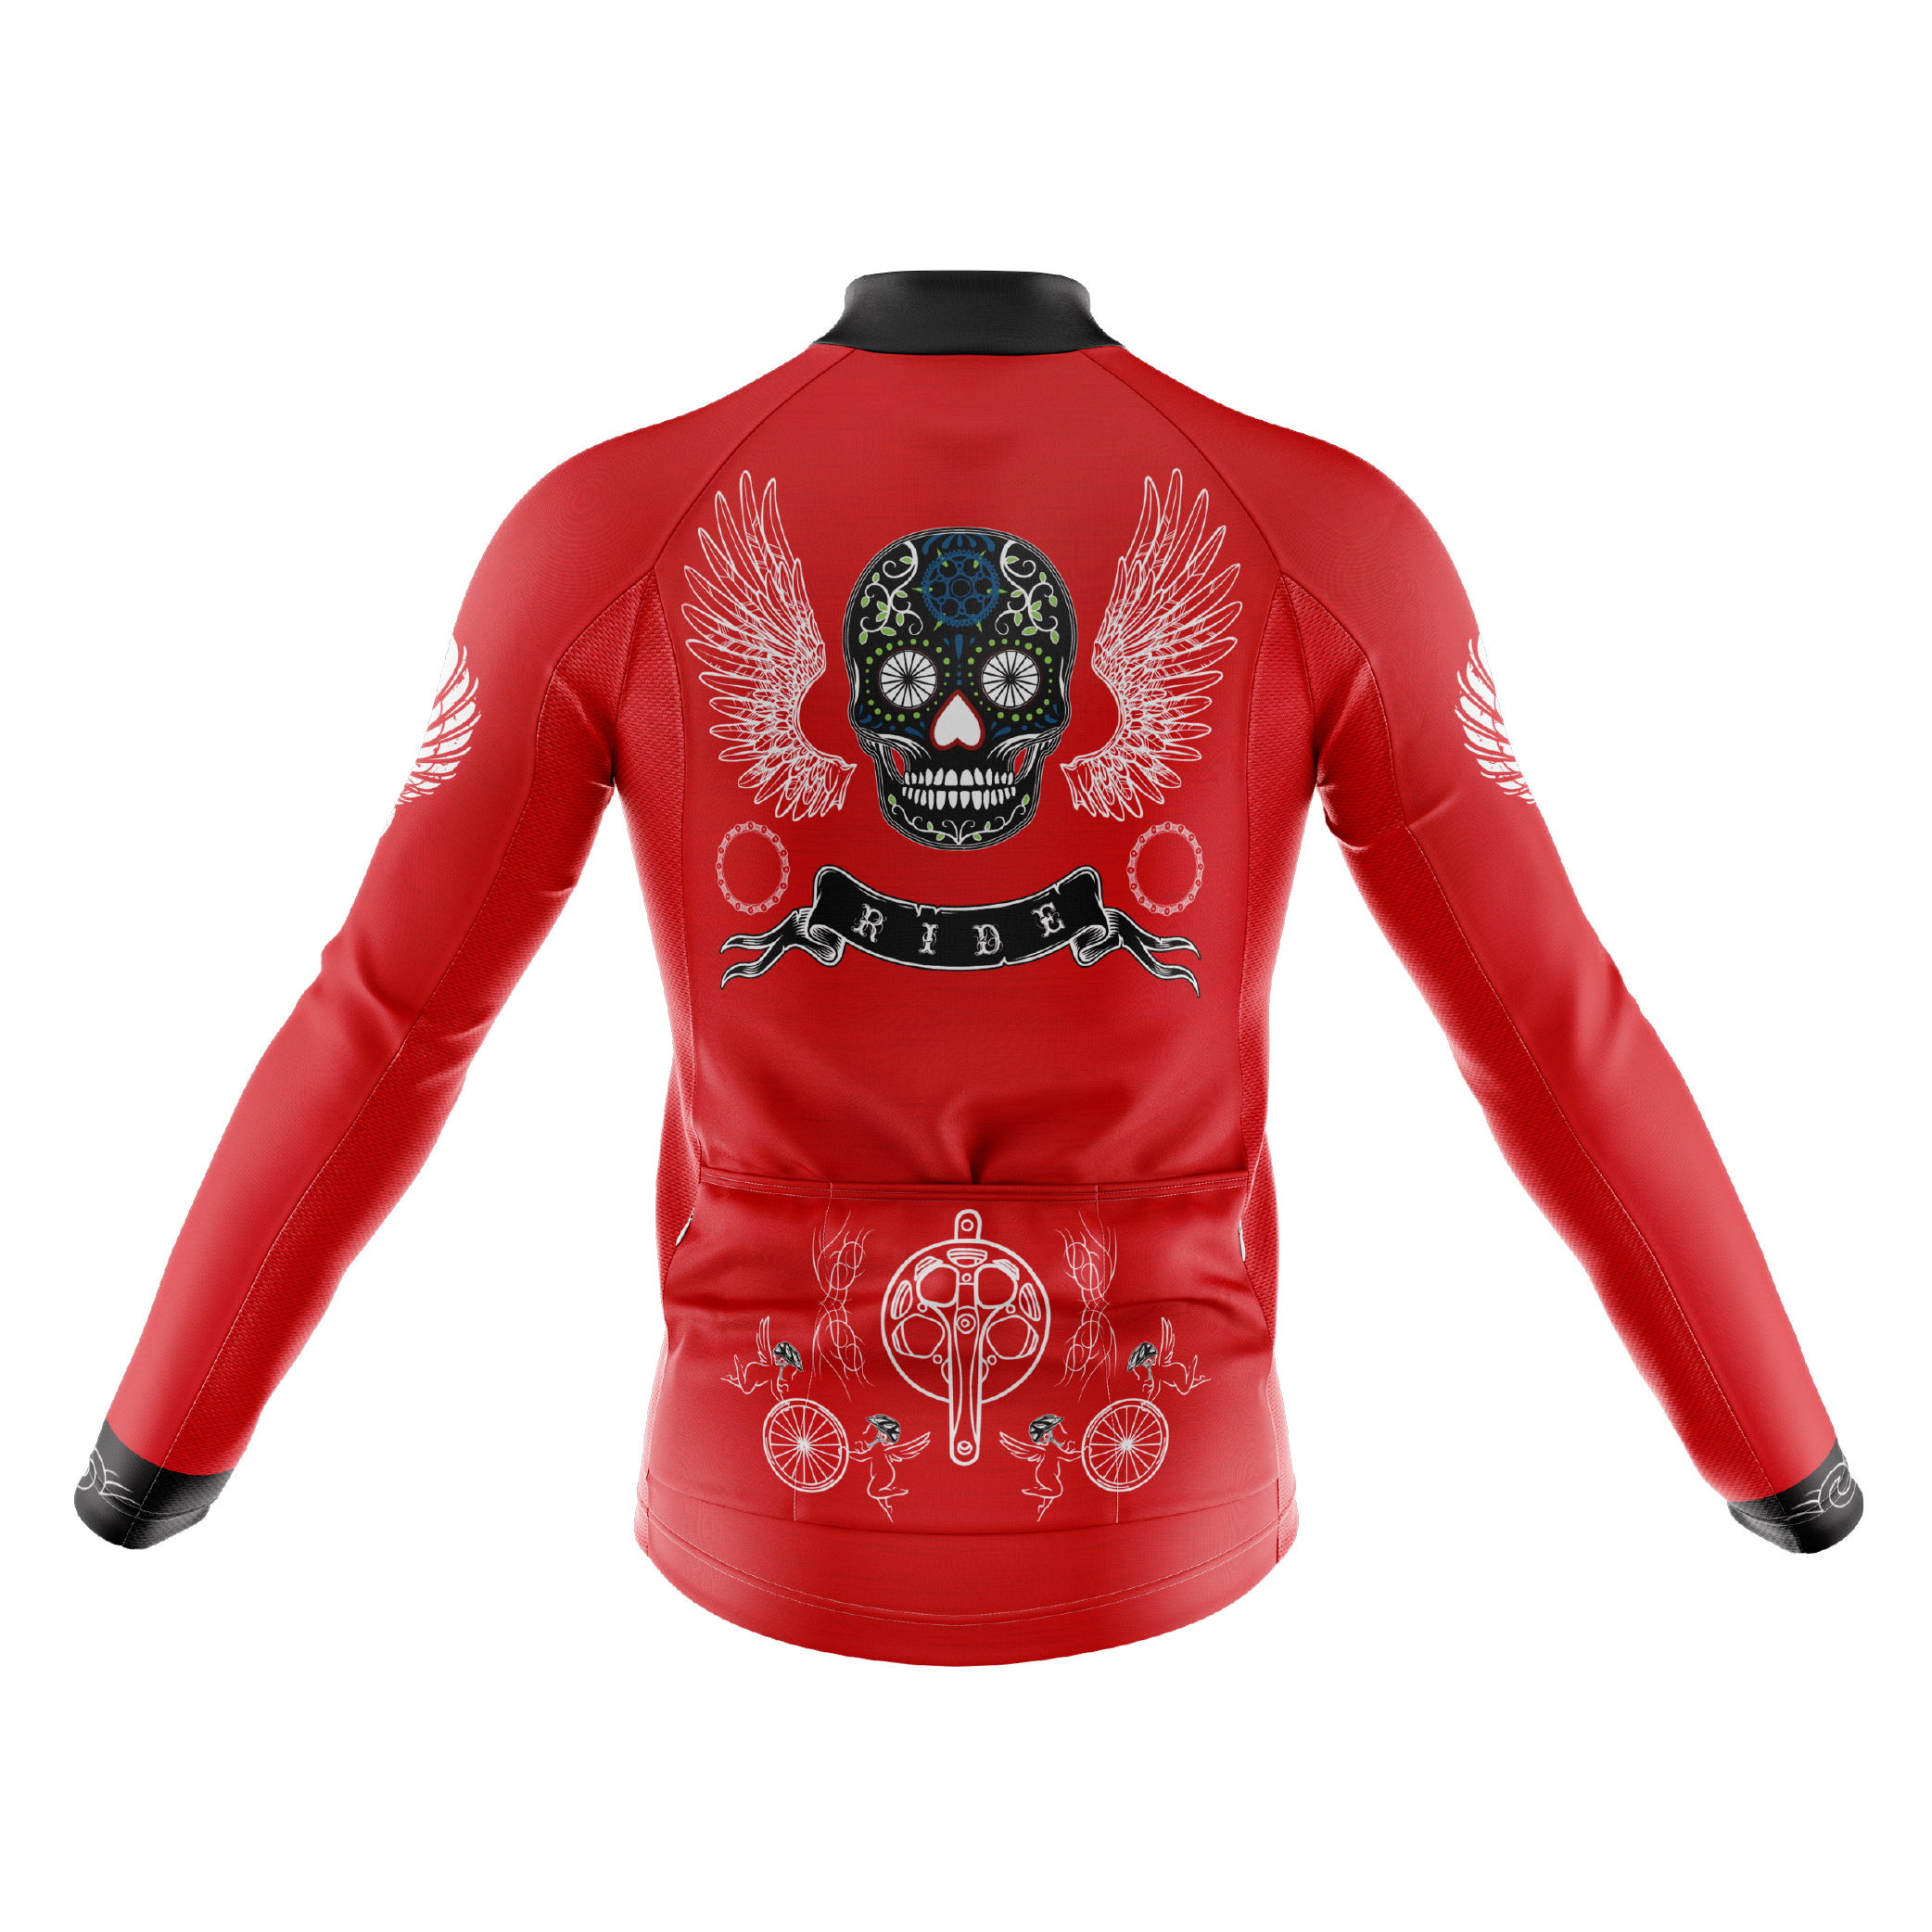 Skull & Gears Red Long Sleeve Cycling Jersey